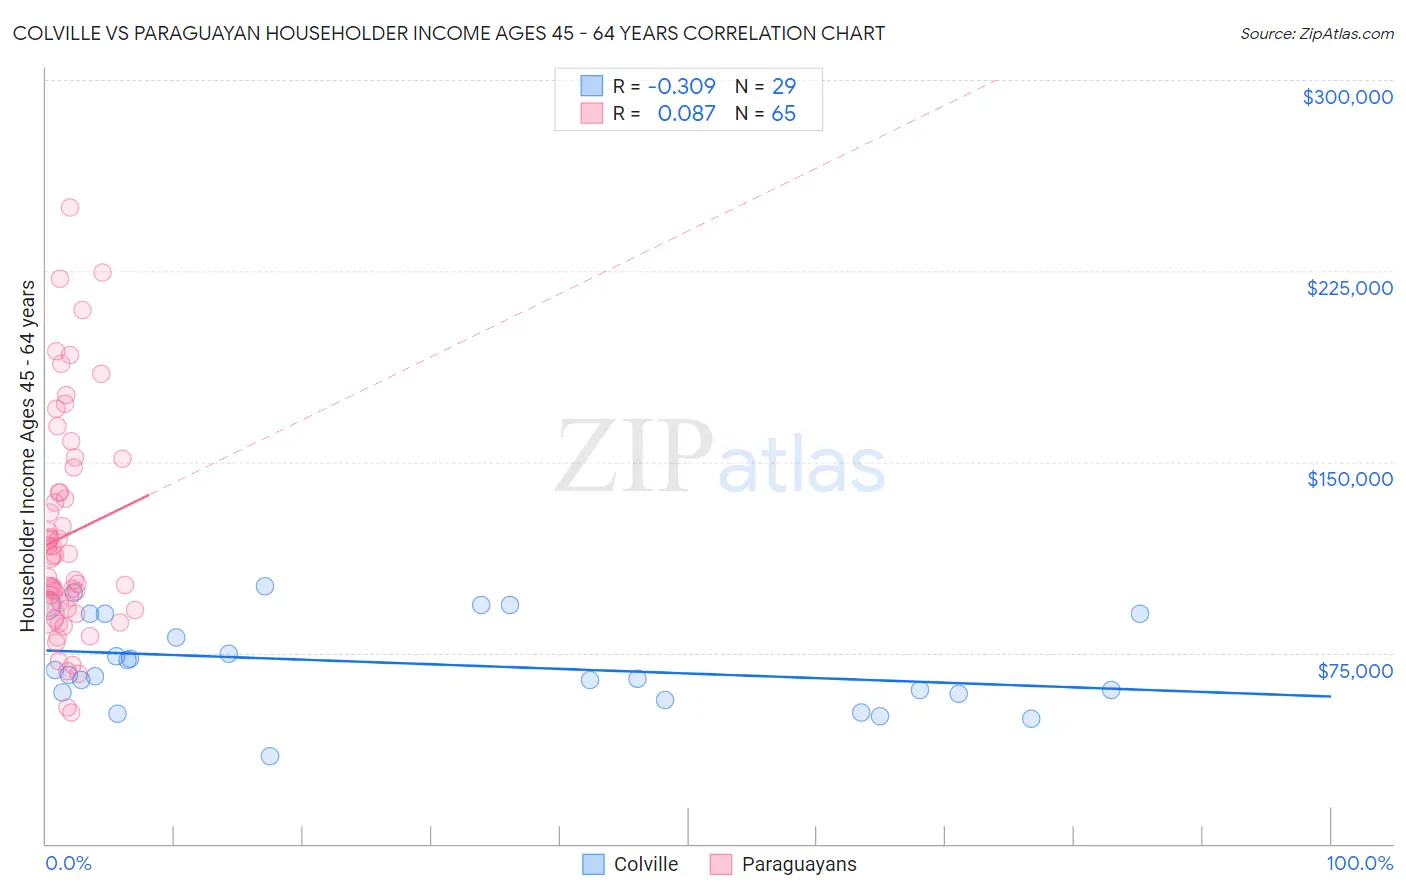 Colville vs Paraguayan Householder Income Ages 45 - 64 years